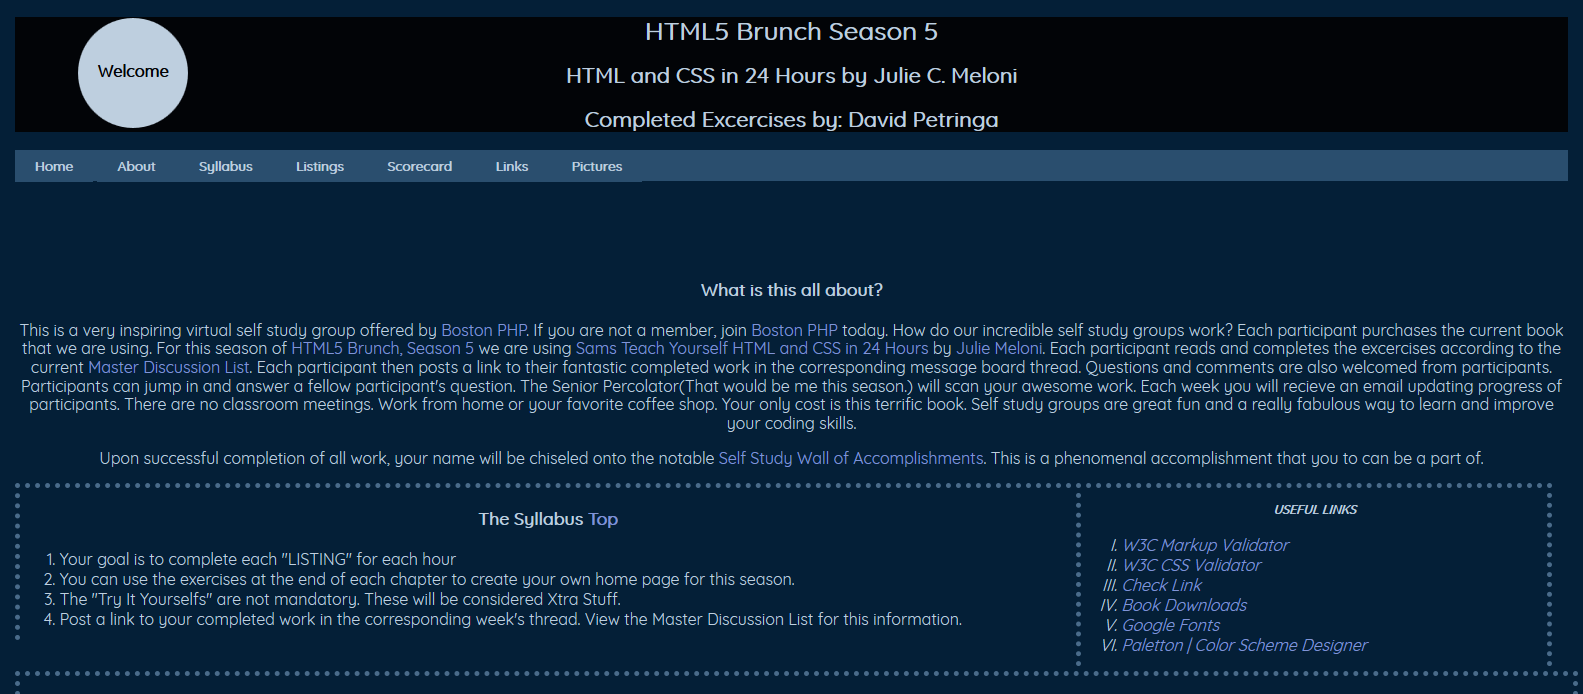 Home Page For HTML5 Brunch Season 5